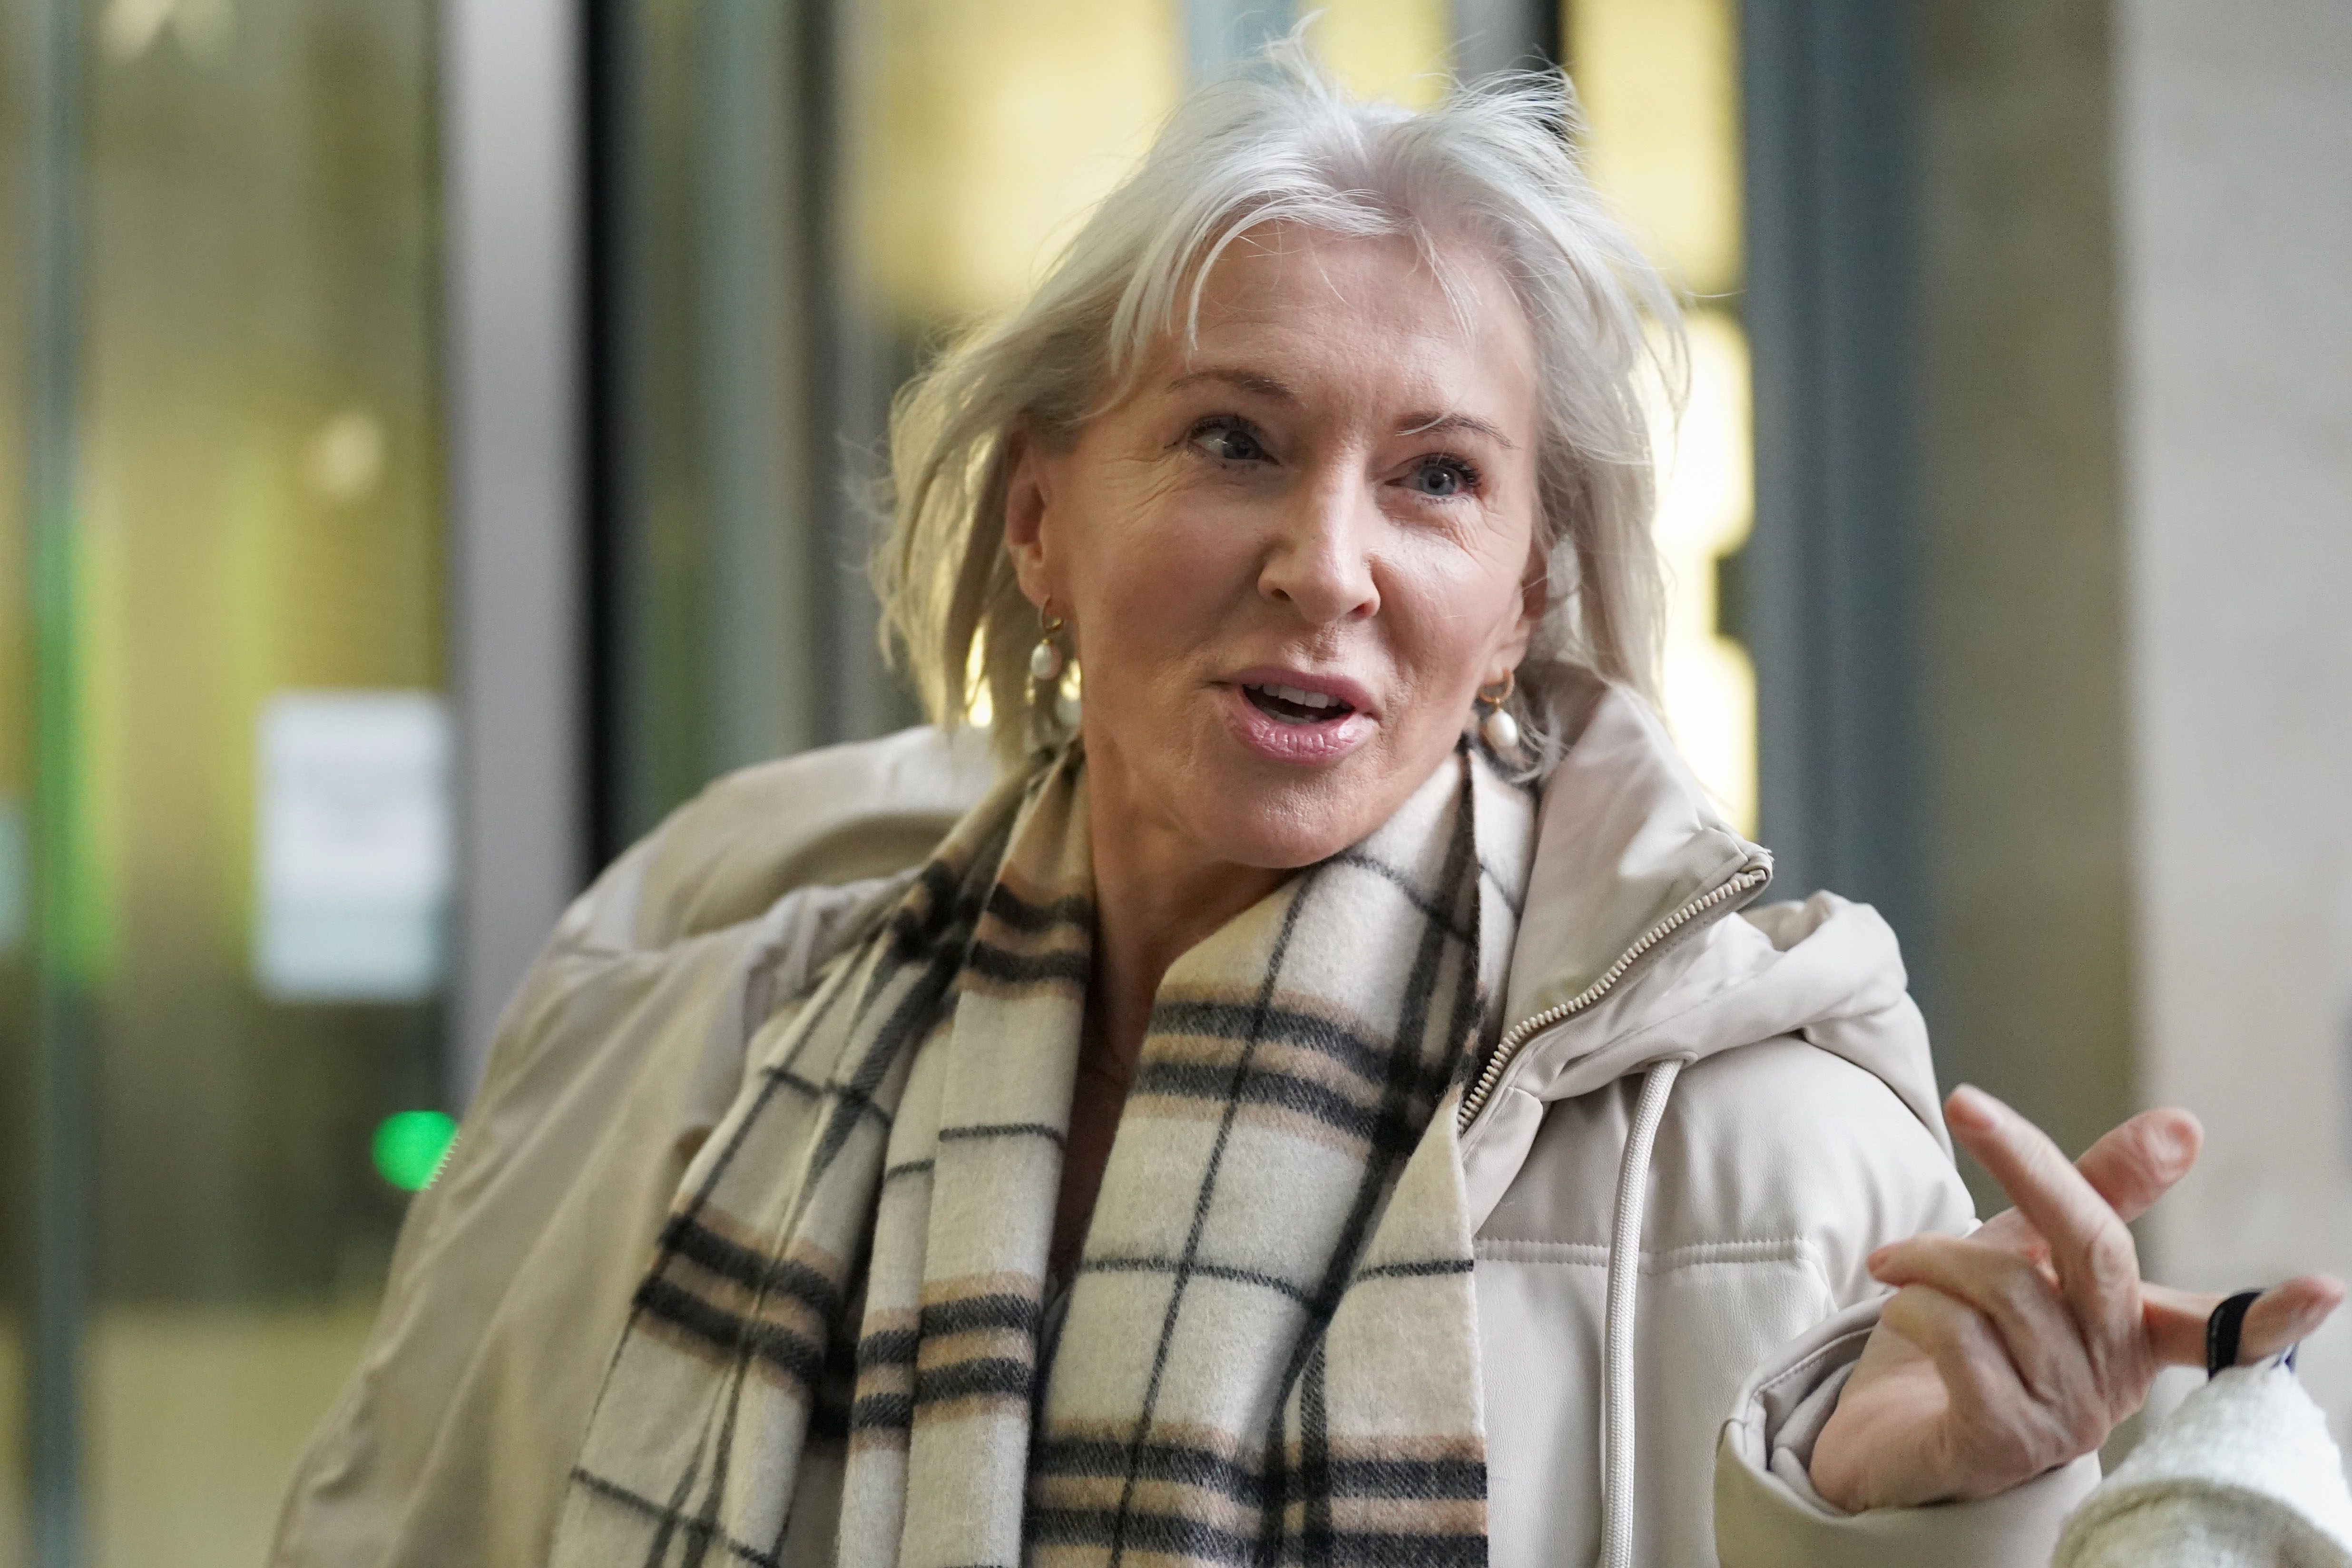 Nadine Dorries has said she will hand back more than £16,876 she mistakenly received in severance pay